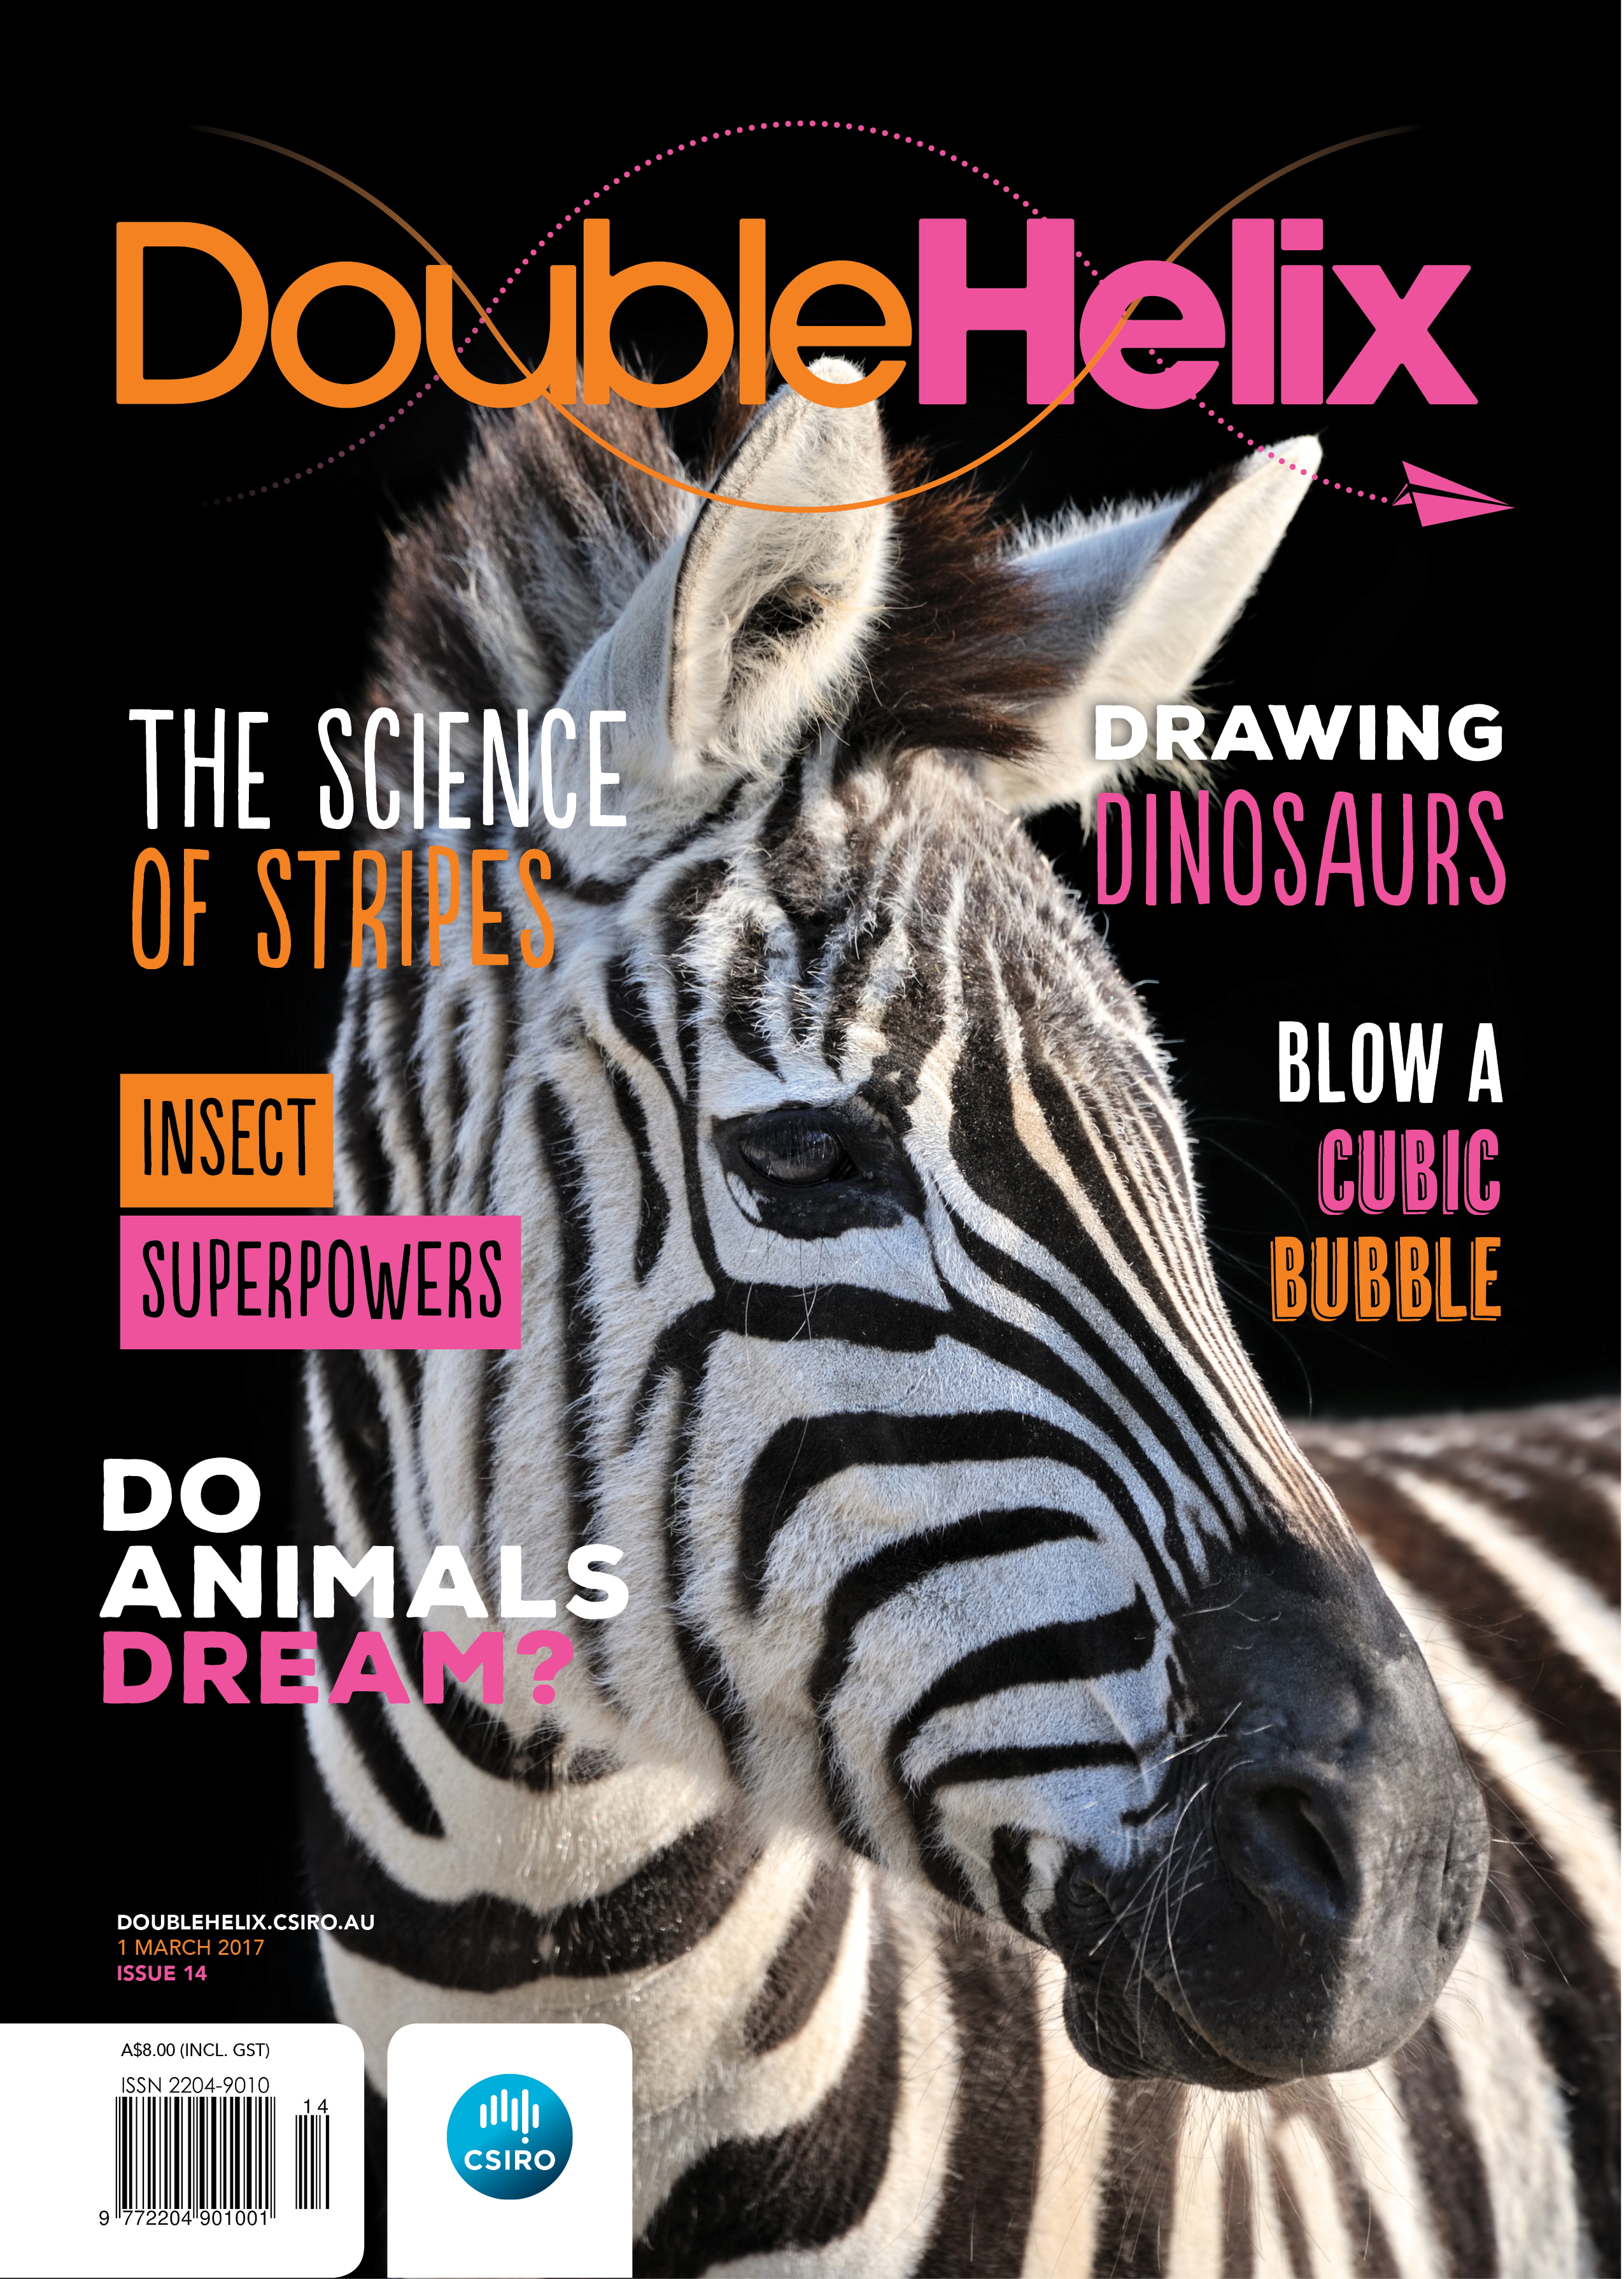 Magazine cover with photograph of zebra head